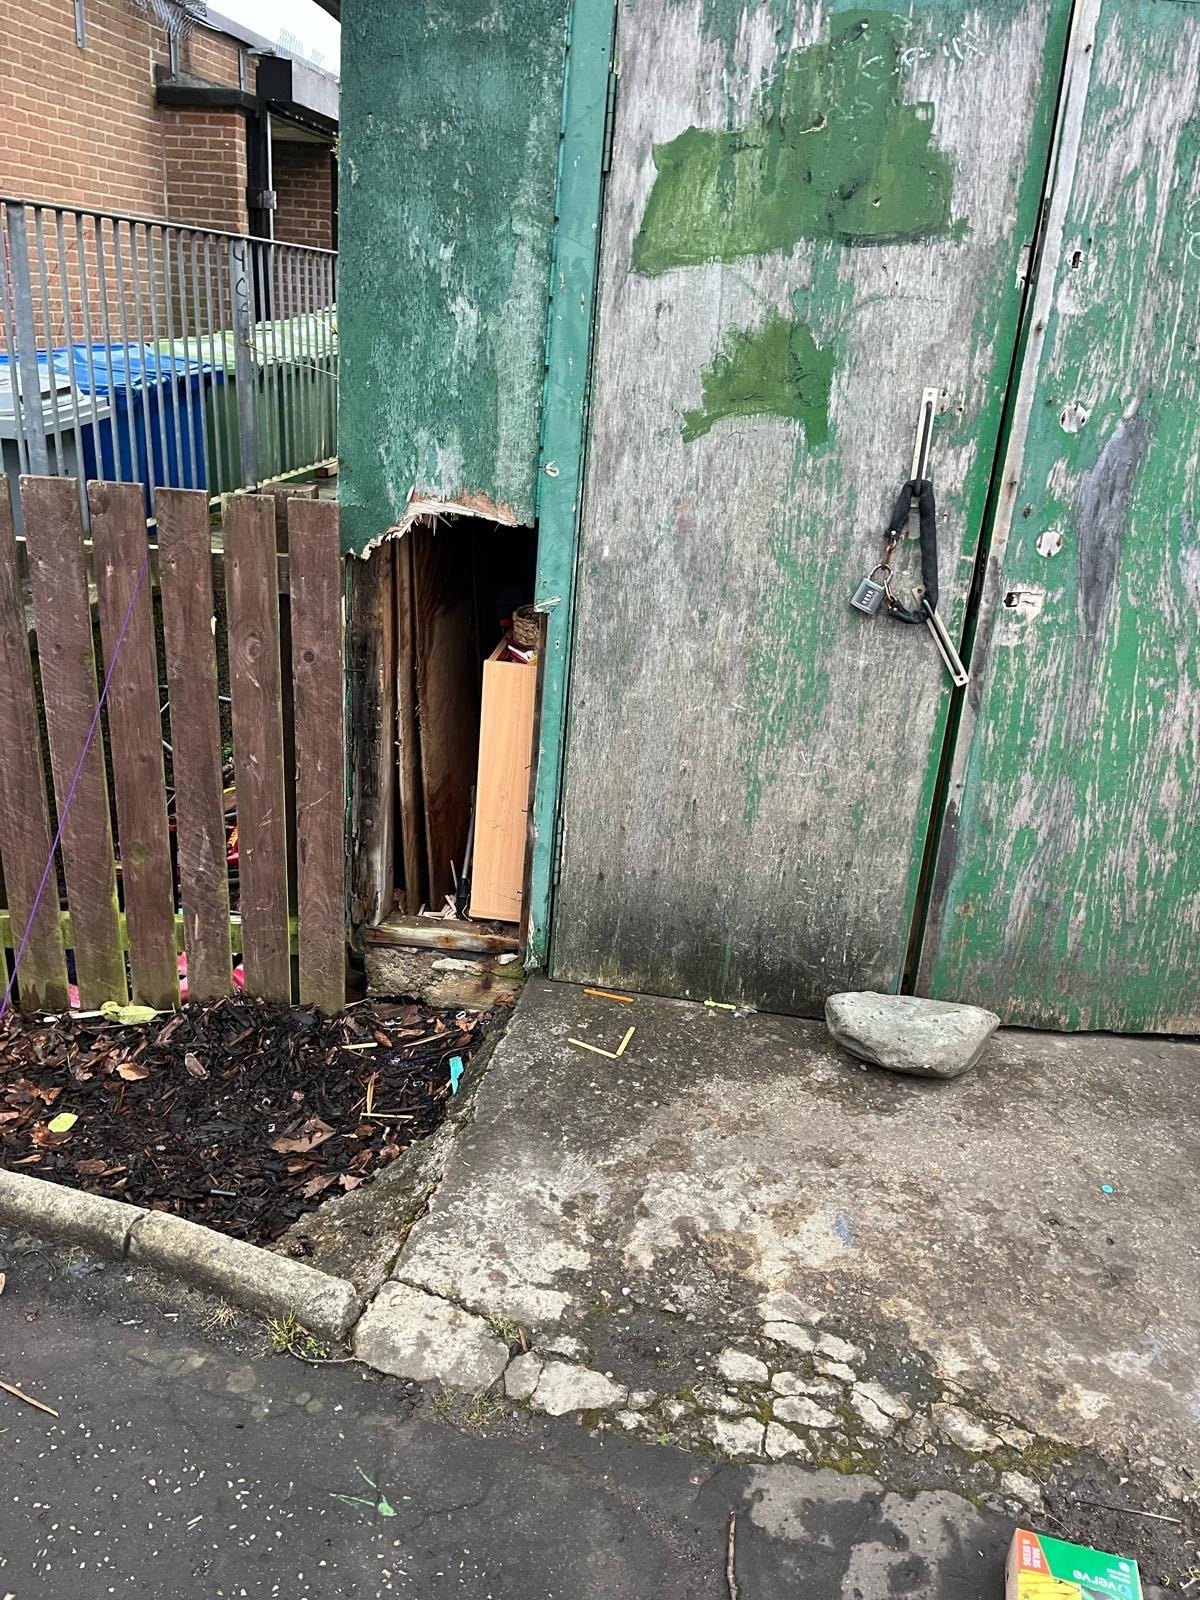 Vandals have targetted the nursery's sheds.